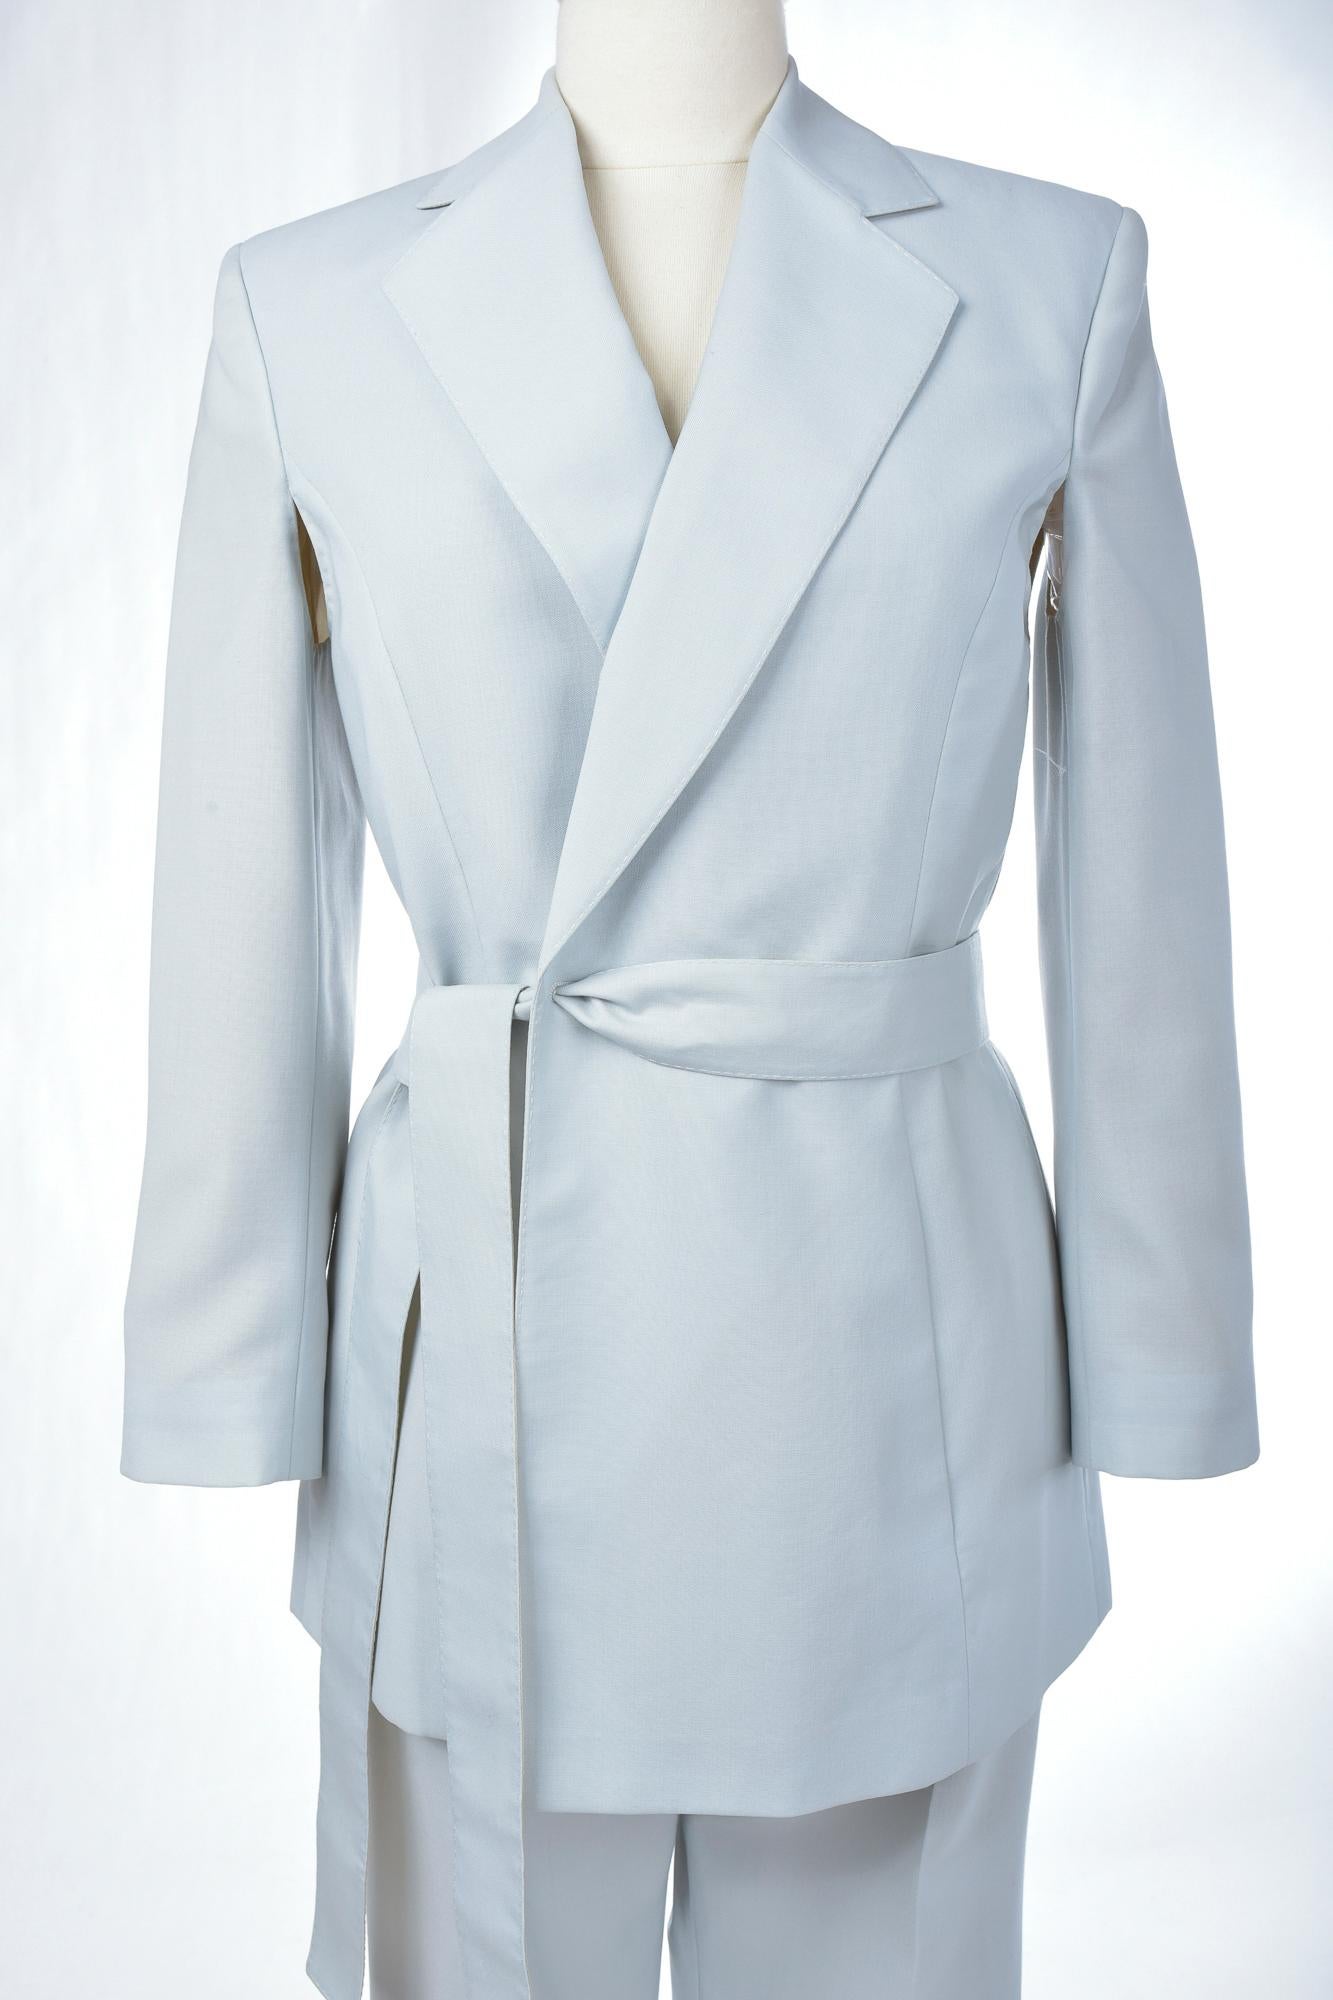 Circa 1995 - 2000

Italy

Elegant Tuxedo Trouser Suit in ice blue virgin wool fabric (100% WV) by the famous Italian designer Mr Gianfranco Ferre (1944 - 2007).  Soft jacket with small epaulettes, long sleeves with armpit holes for ease of movement,